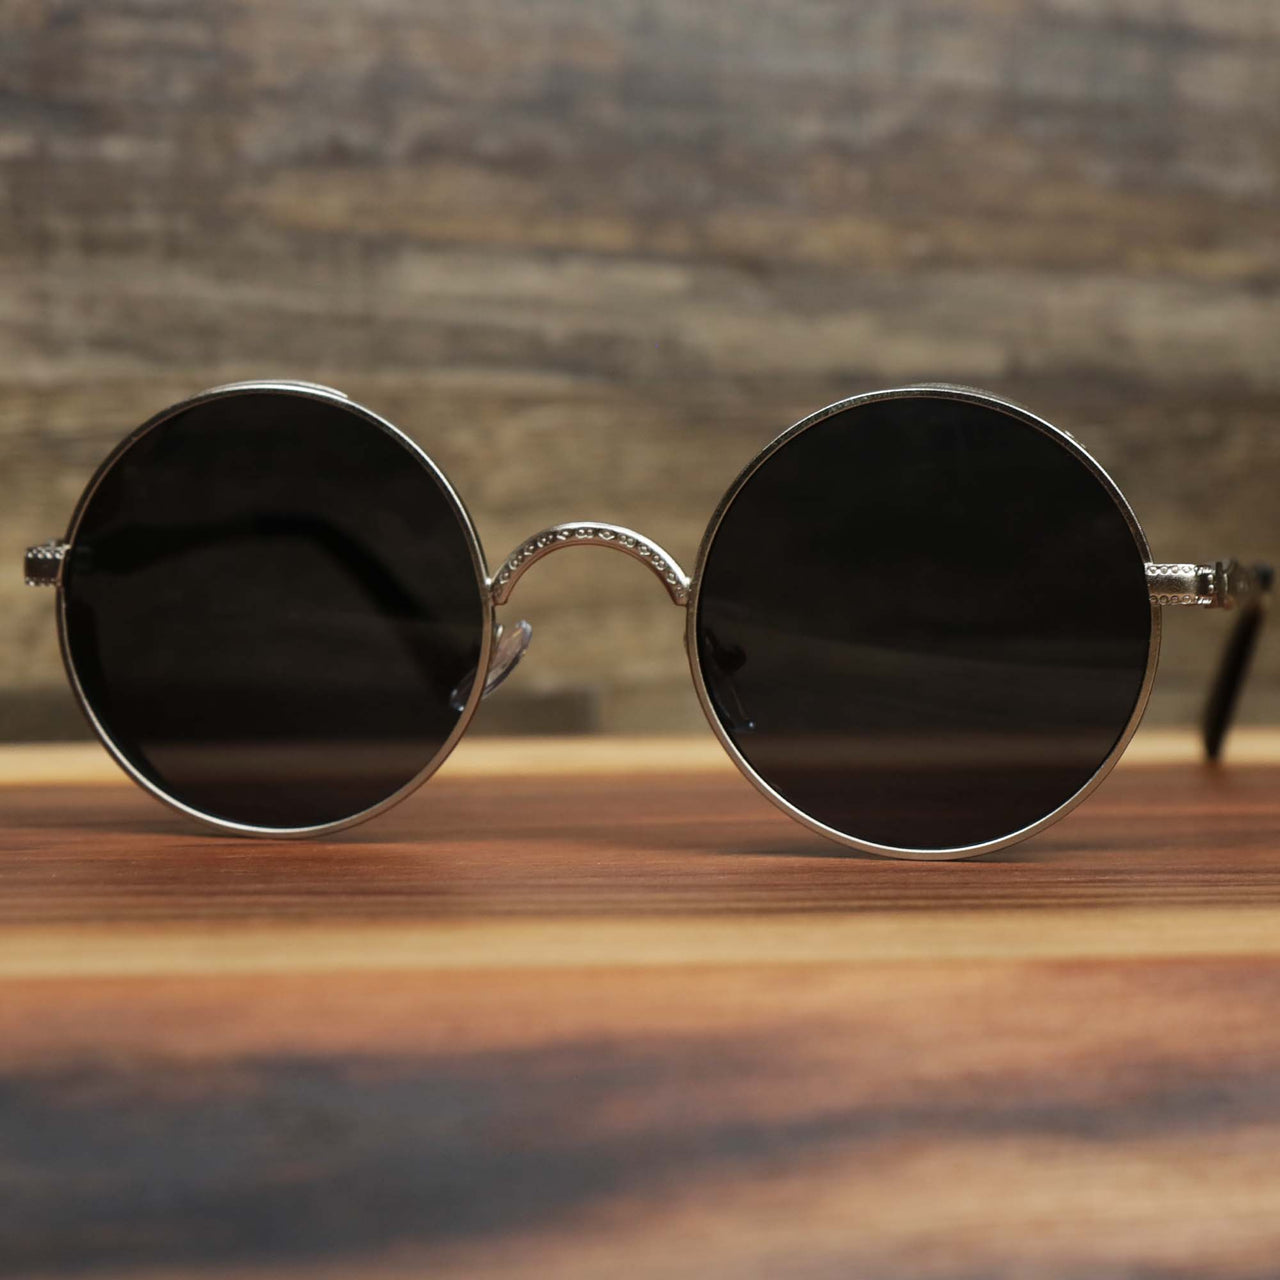 The Round Frame Arched Bridge Black Lens Sunglasses with Silver Frame